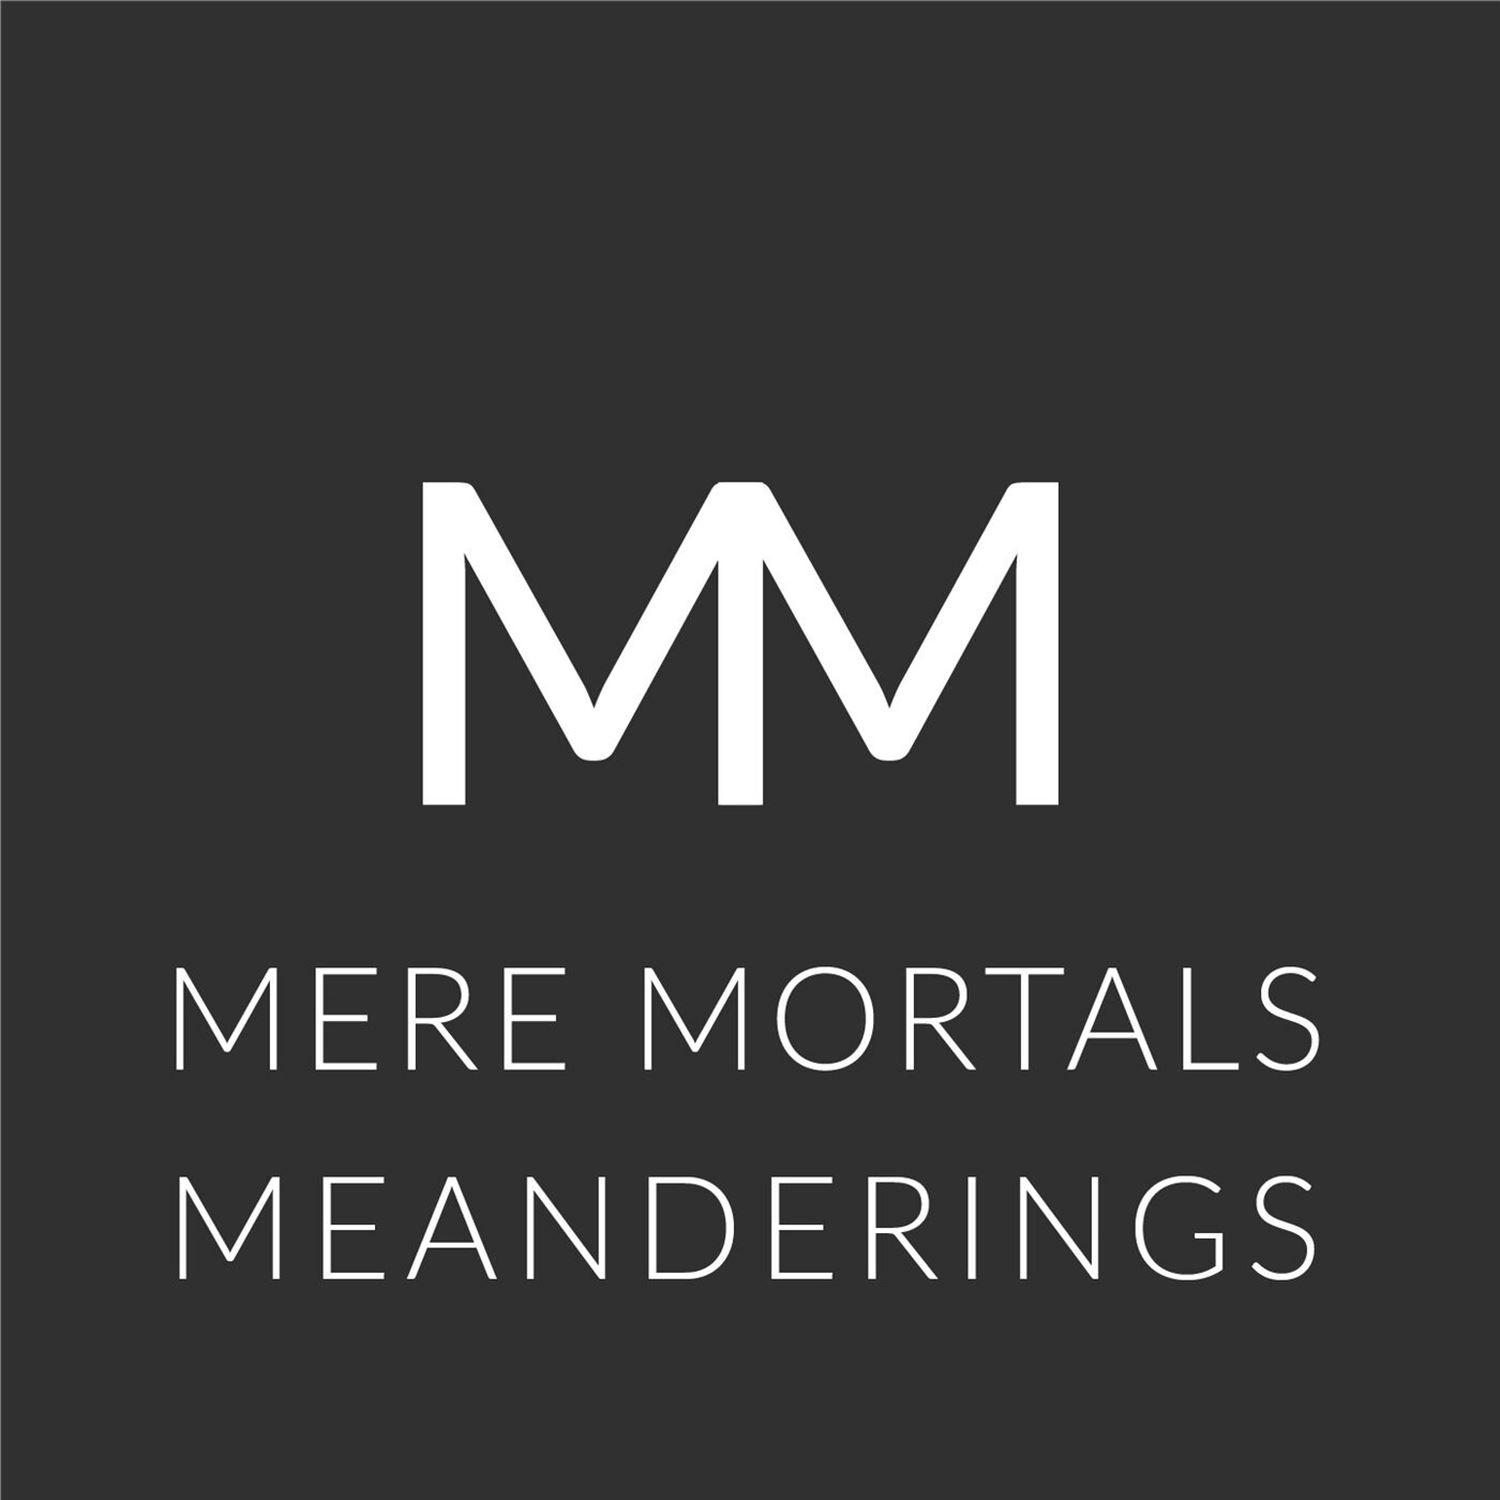 Viewing Death Differently (Mere Mortals Episode #92 - Meanderings)